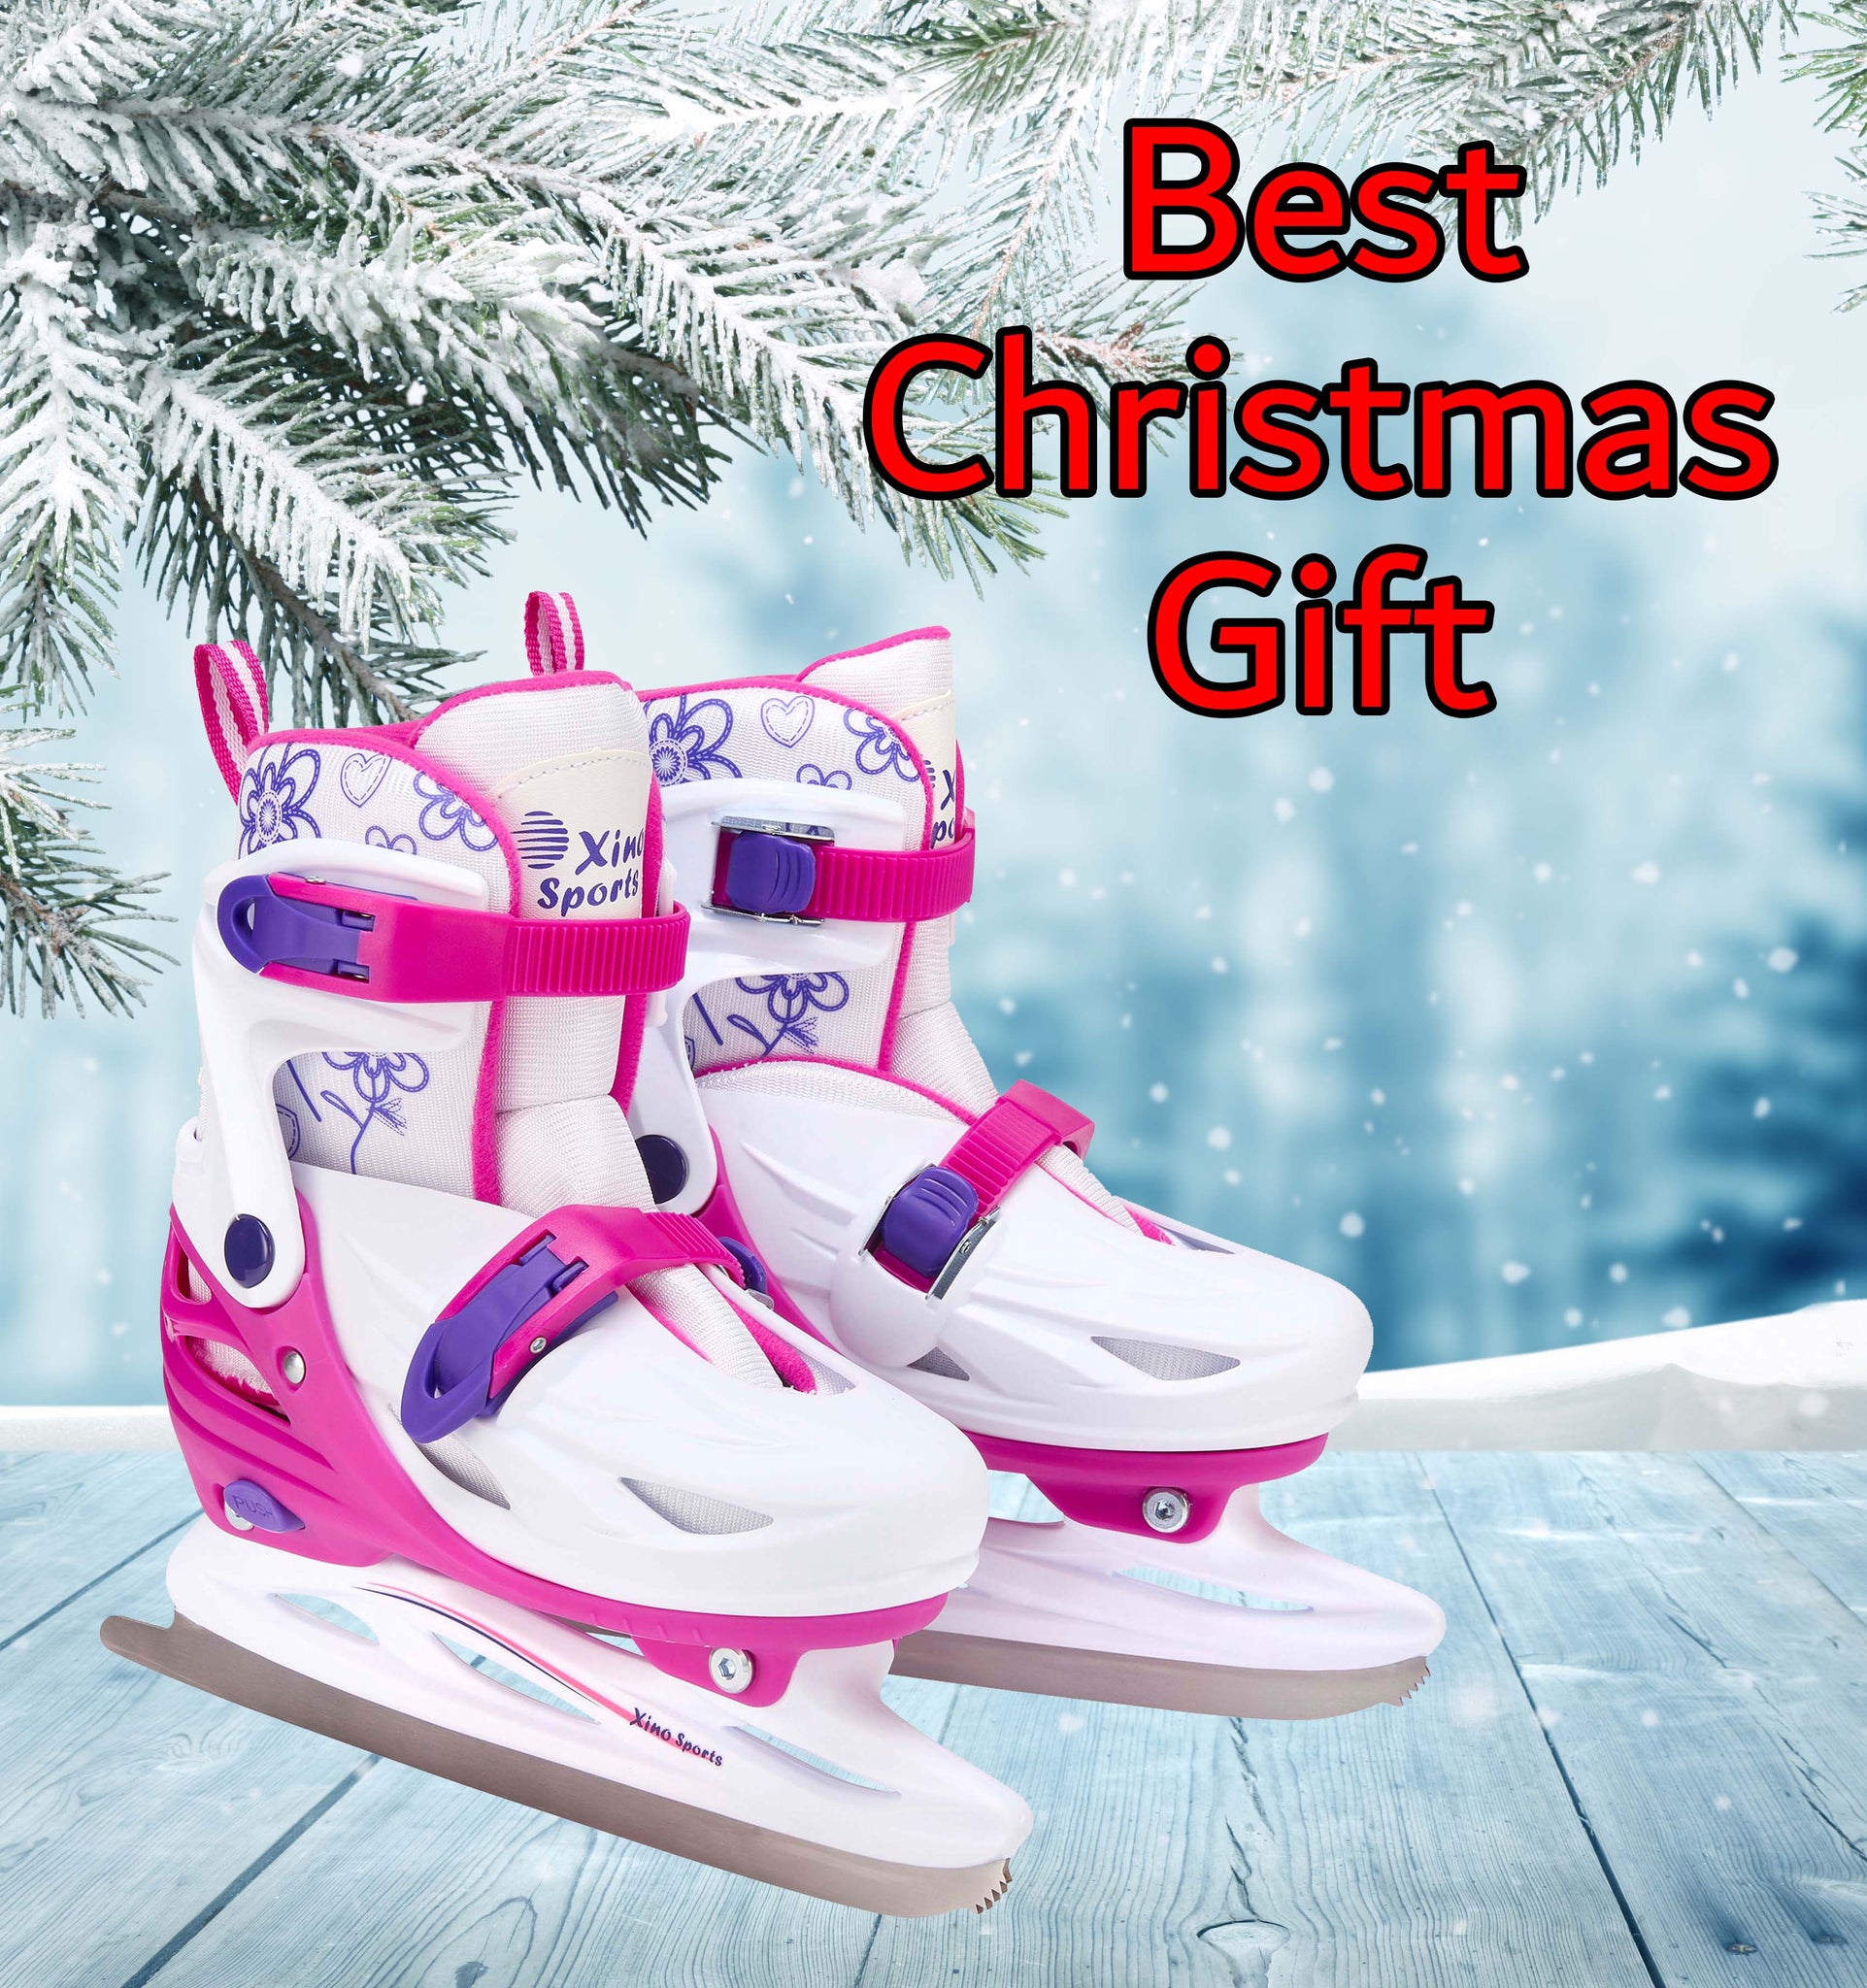 Xino Sports Adjustable Ice Skates - for Girls and Boys, Two Awesome Colors - Blue and Pink, Soft Padding and Reinforced Ankle Support, Fun to Skate! (